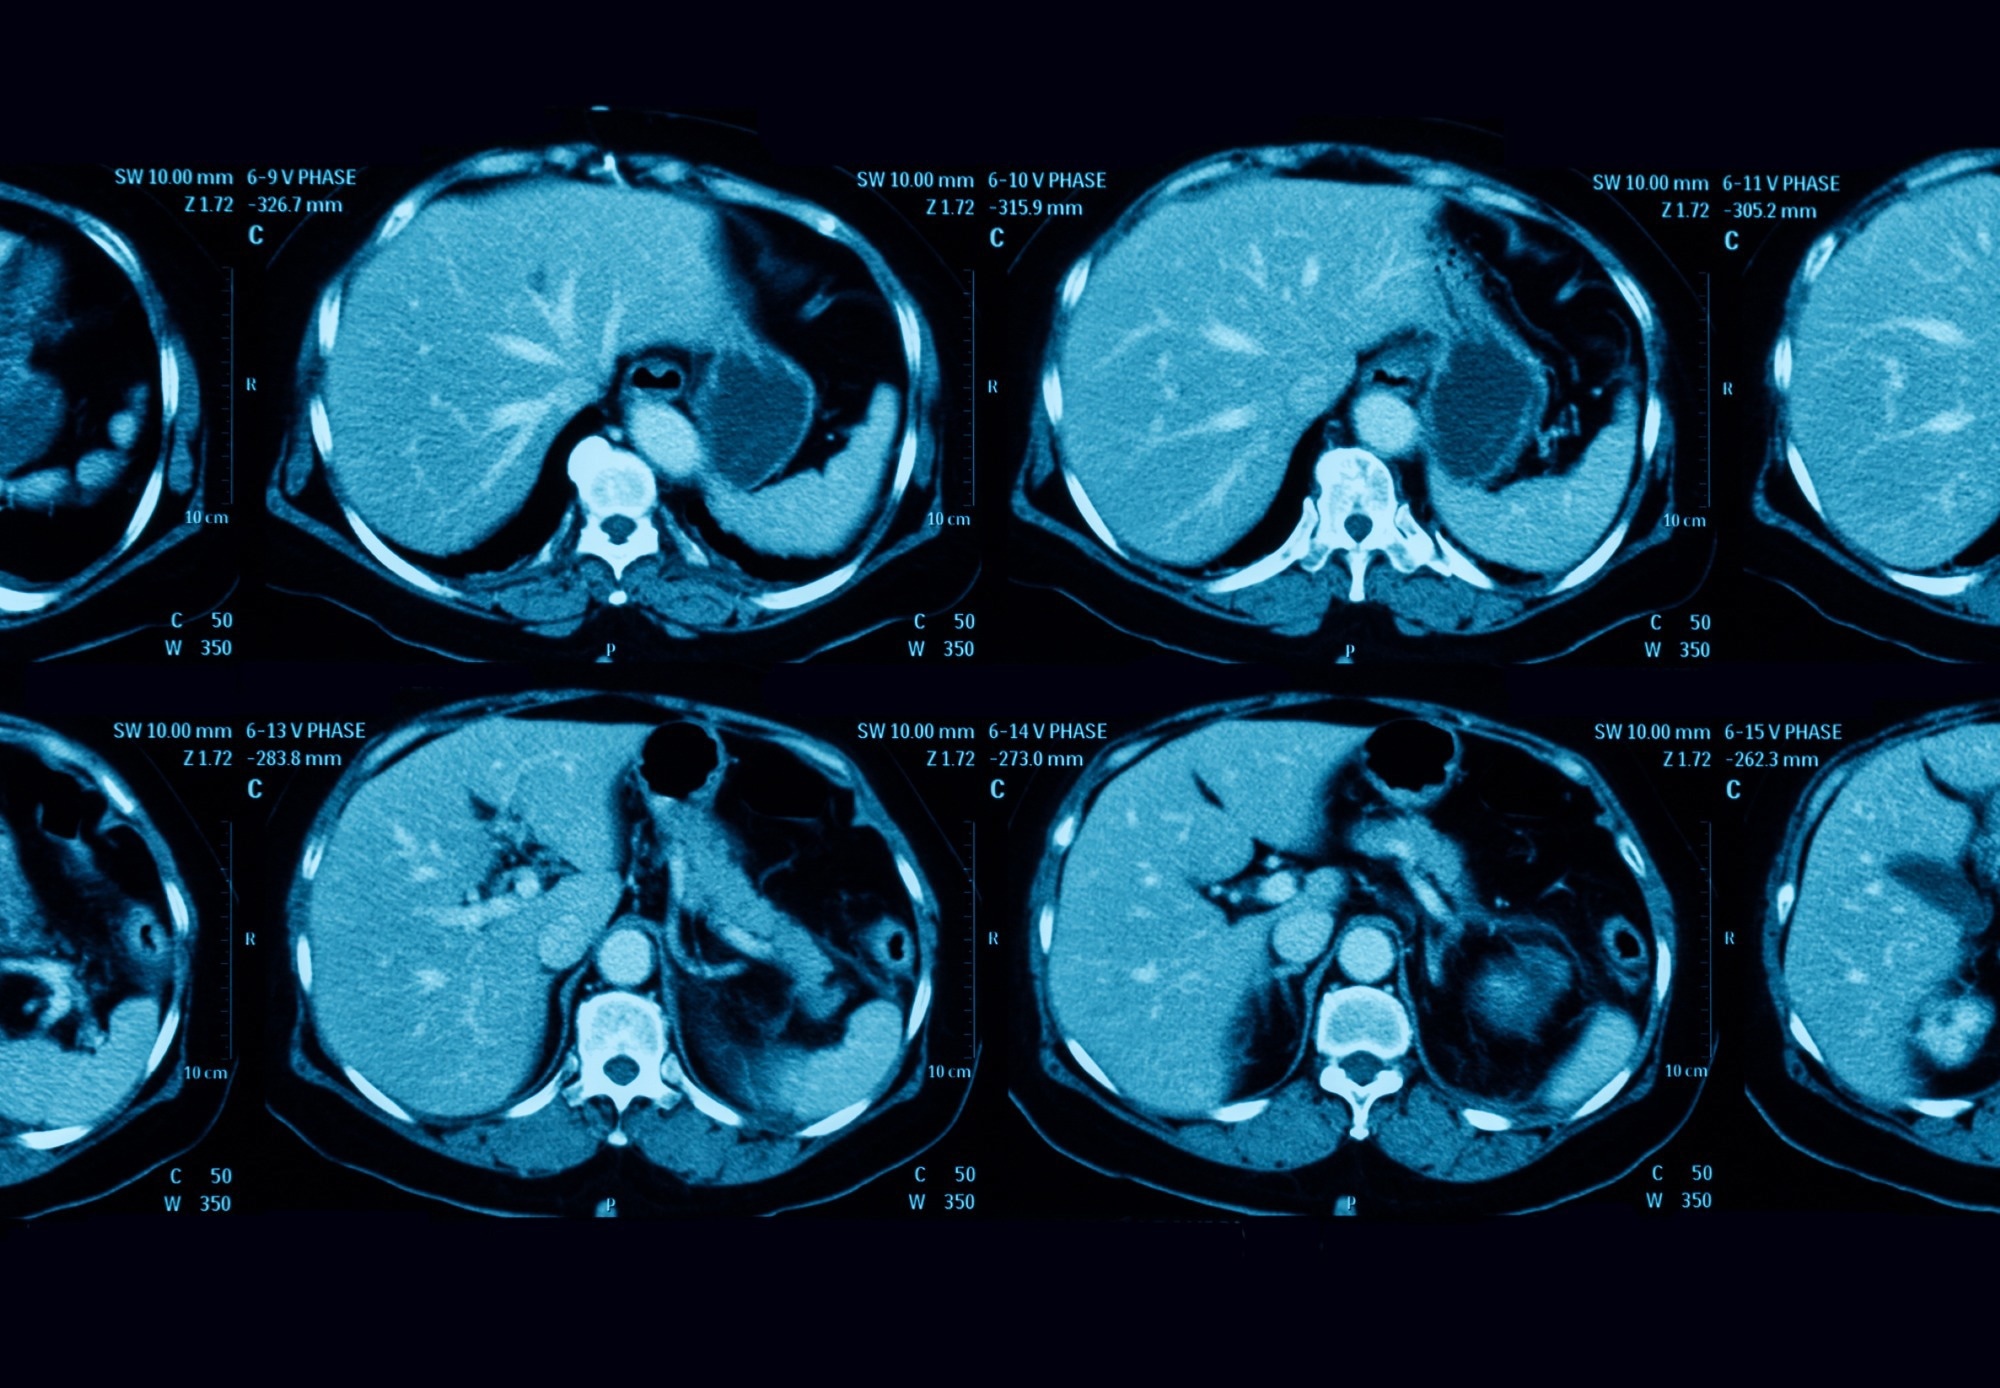 Study: Pancreatic Cancer Detection on CT Scans with Deep Learning: A Nationwide Population-based Study. Image Credit: Suttha Burawonk / Shutterstock